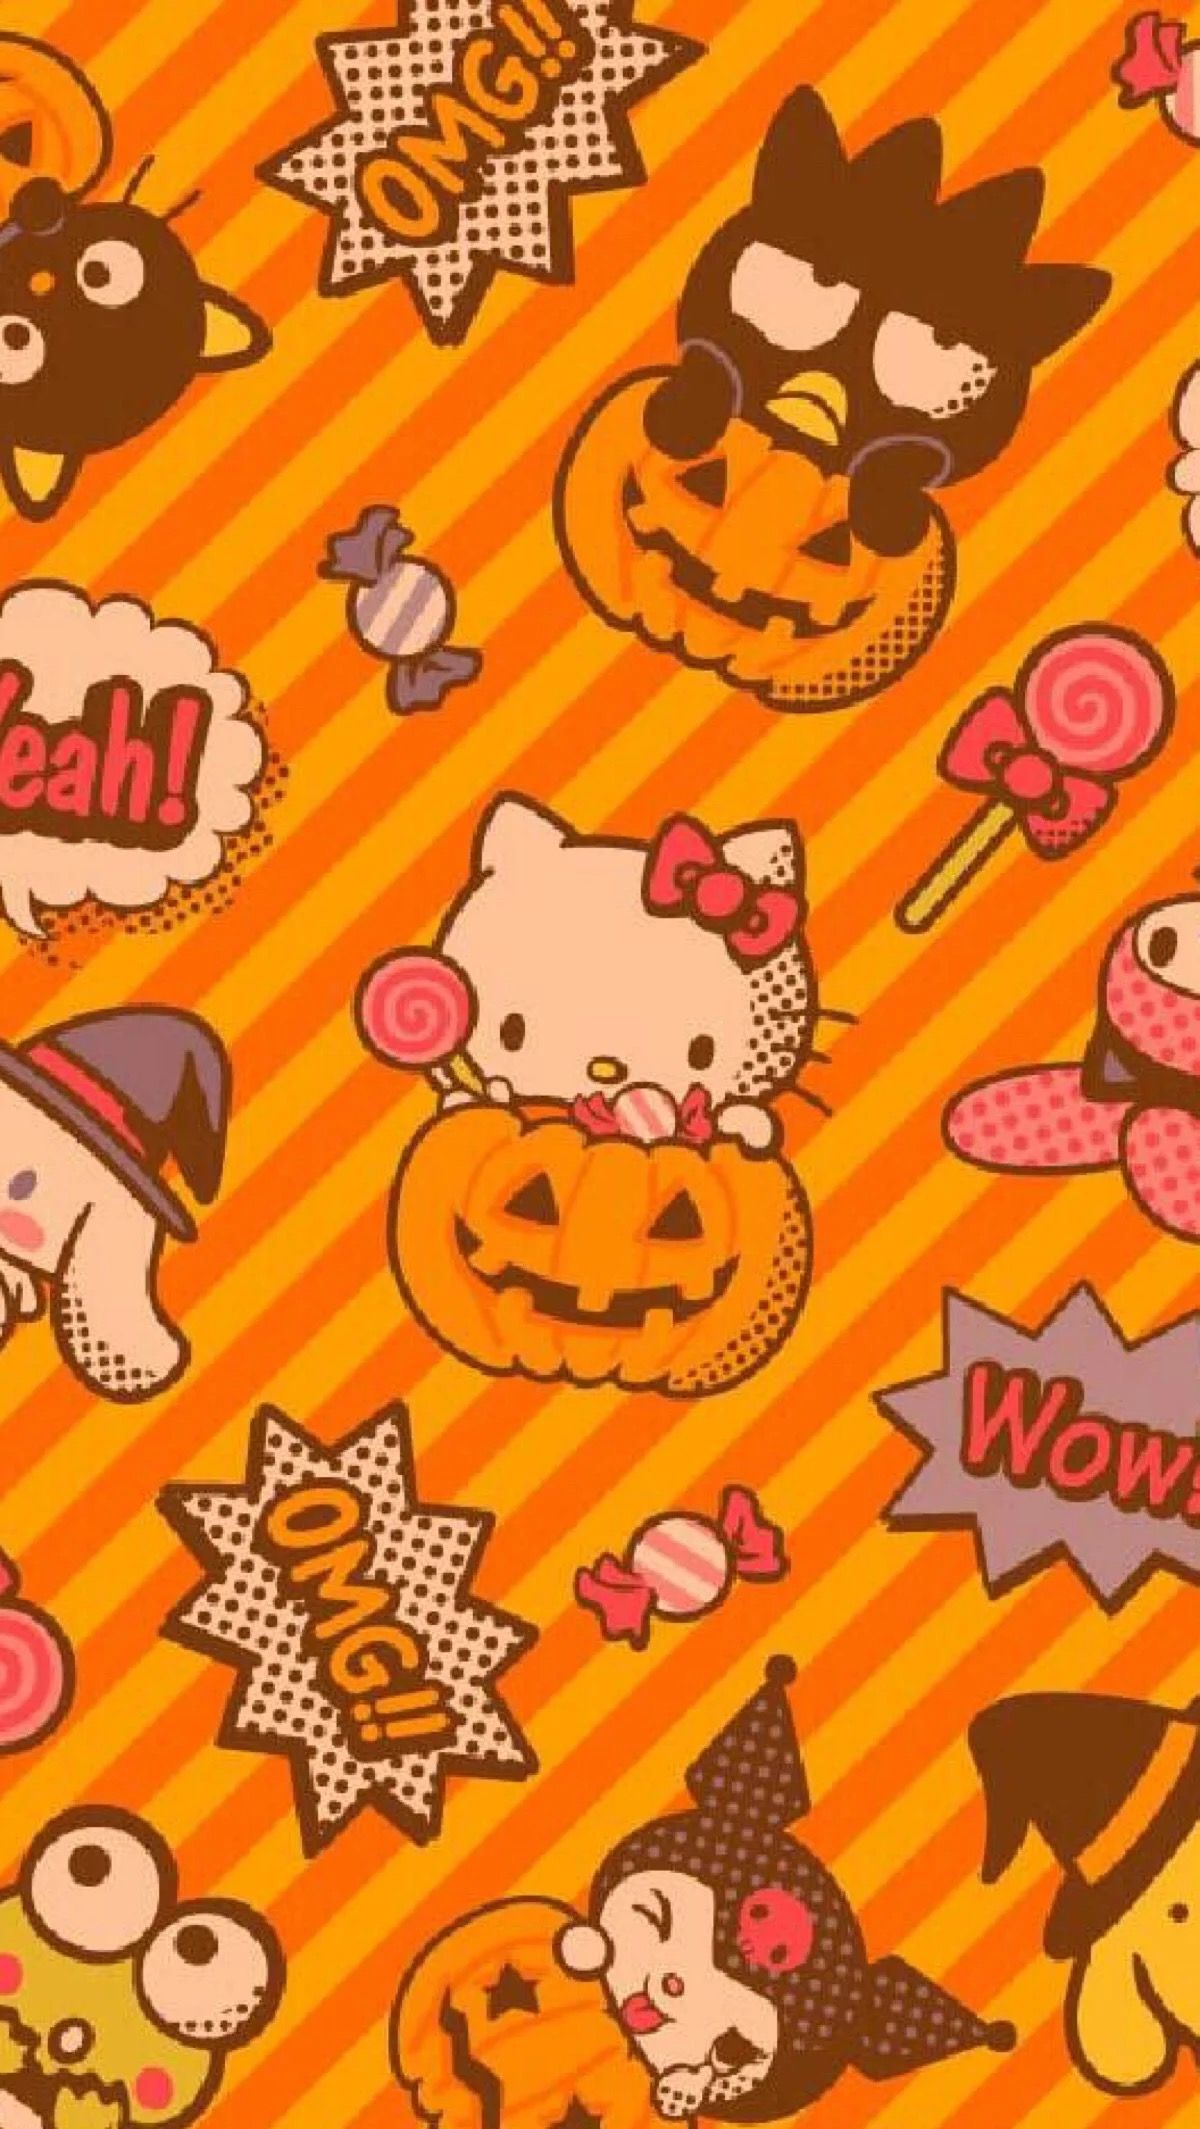 and like OMG! get some yourself some pawtastic adorable cat apparel!. Hello kitty halloween wallpaper, Hello kitty halloween, Hello kitty background